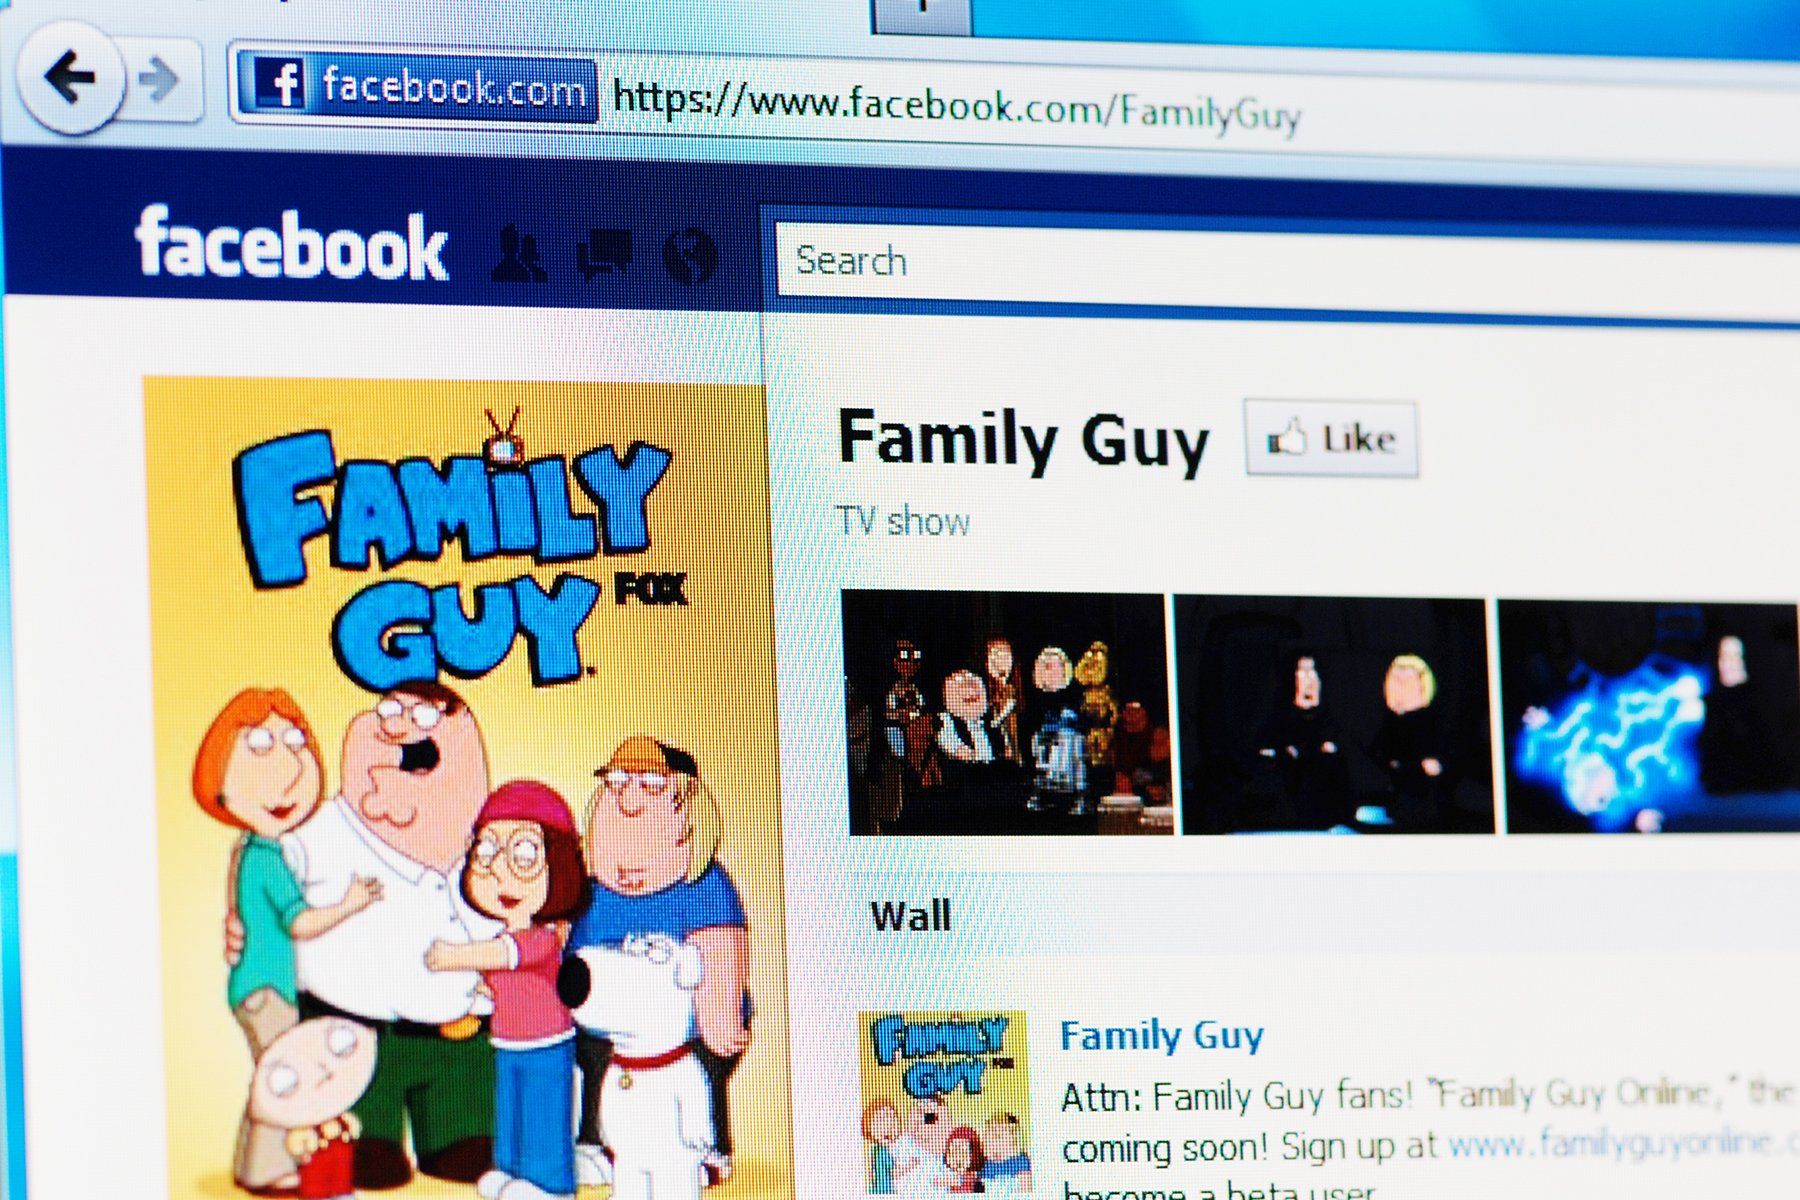 How to watch Family Guy online and stream every episode wherever